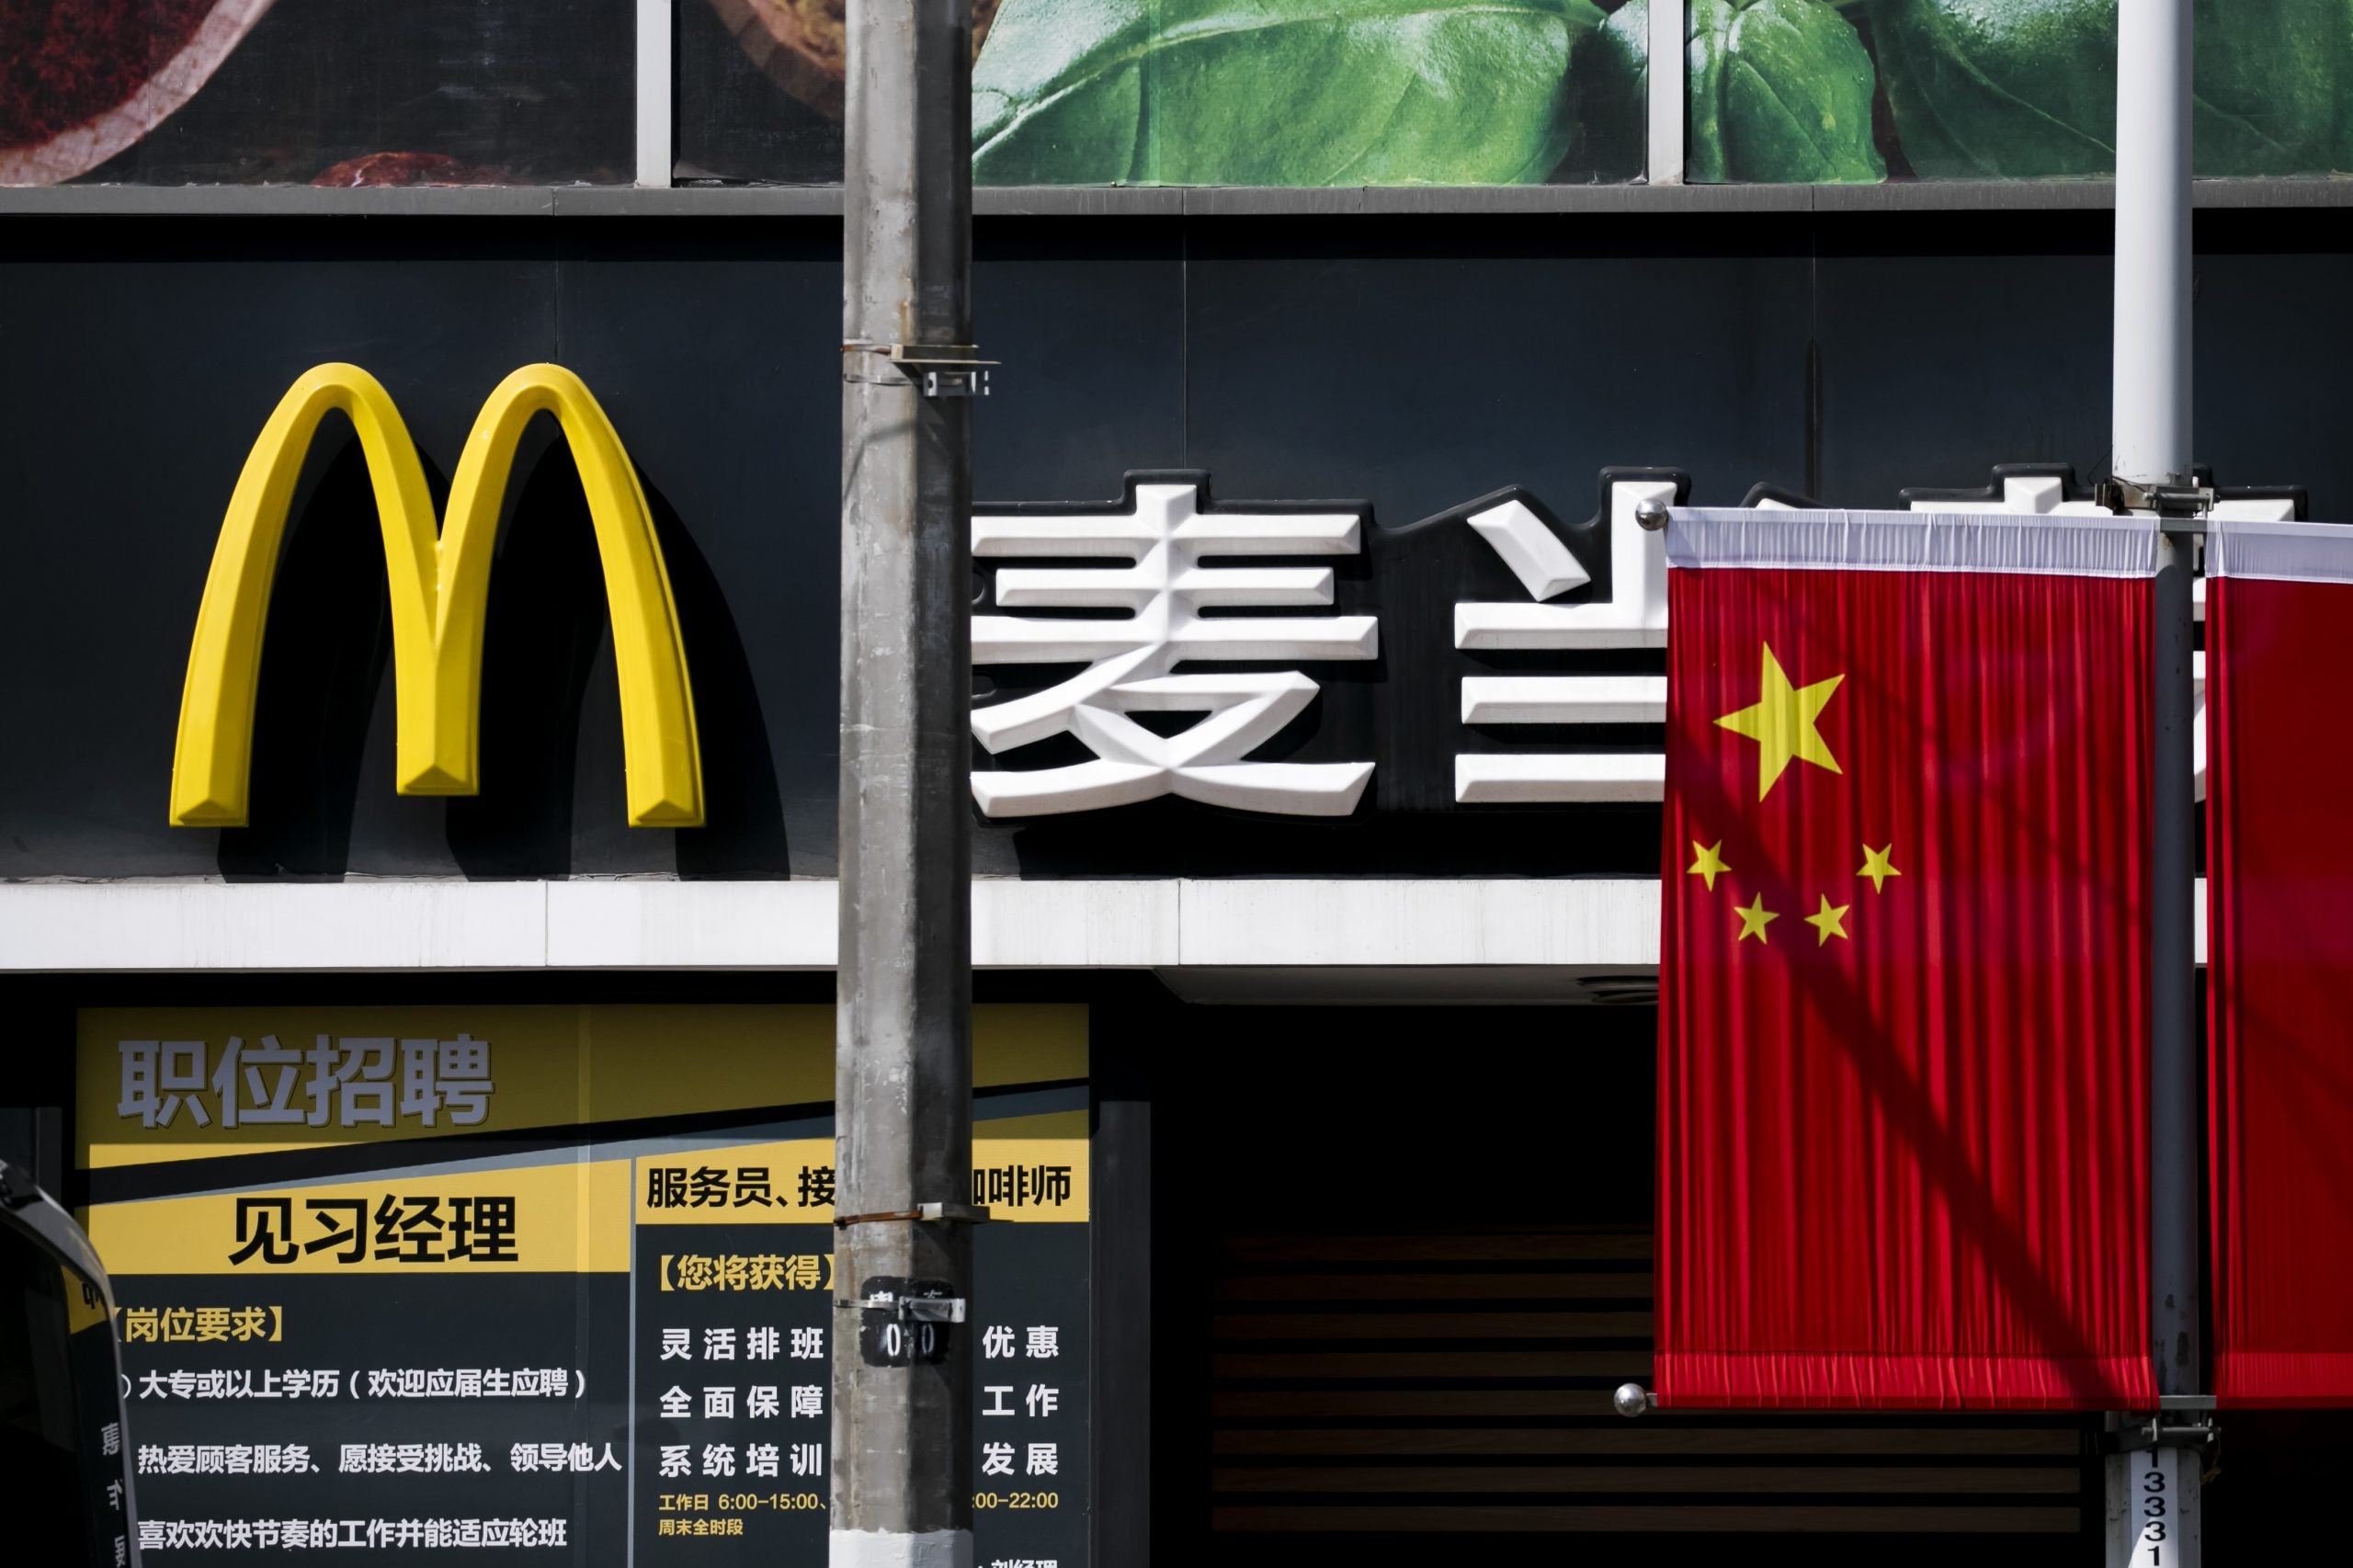 McDonald's Apologizes For Restaurant's Ban On Black People